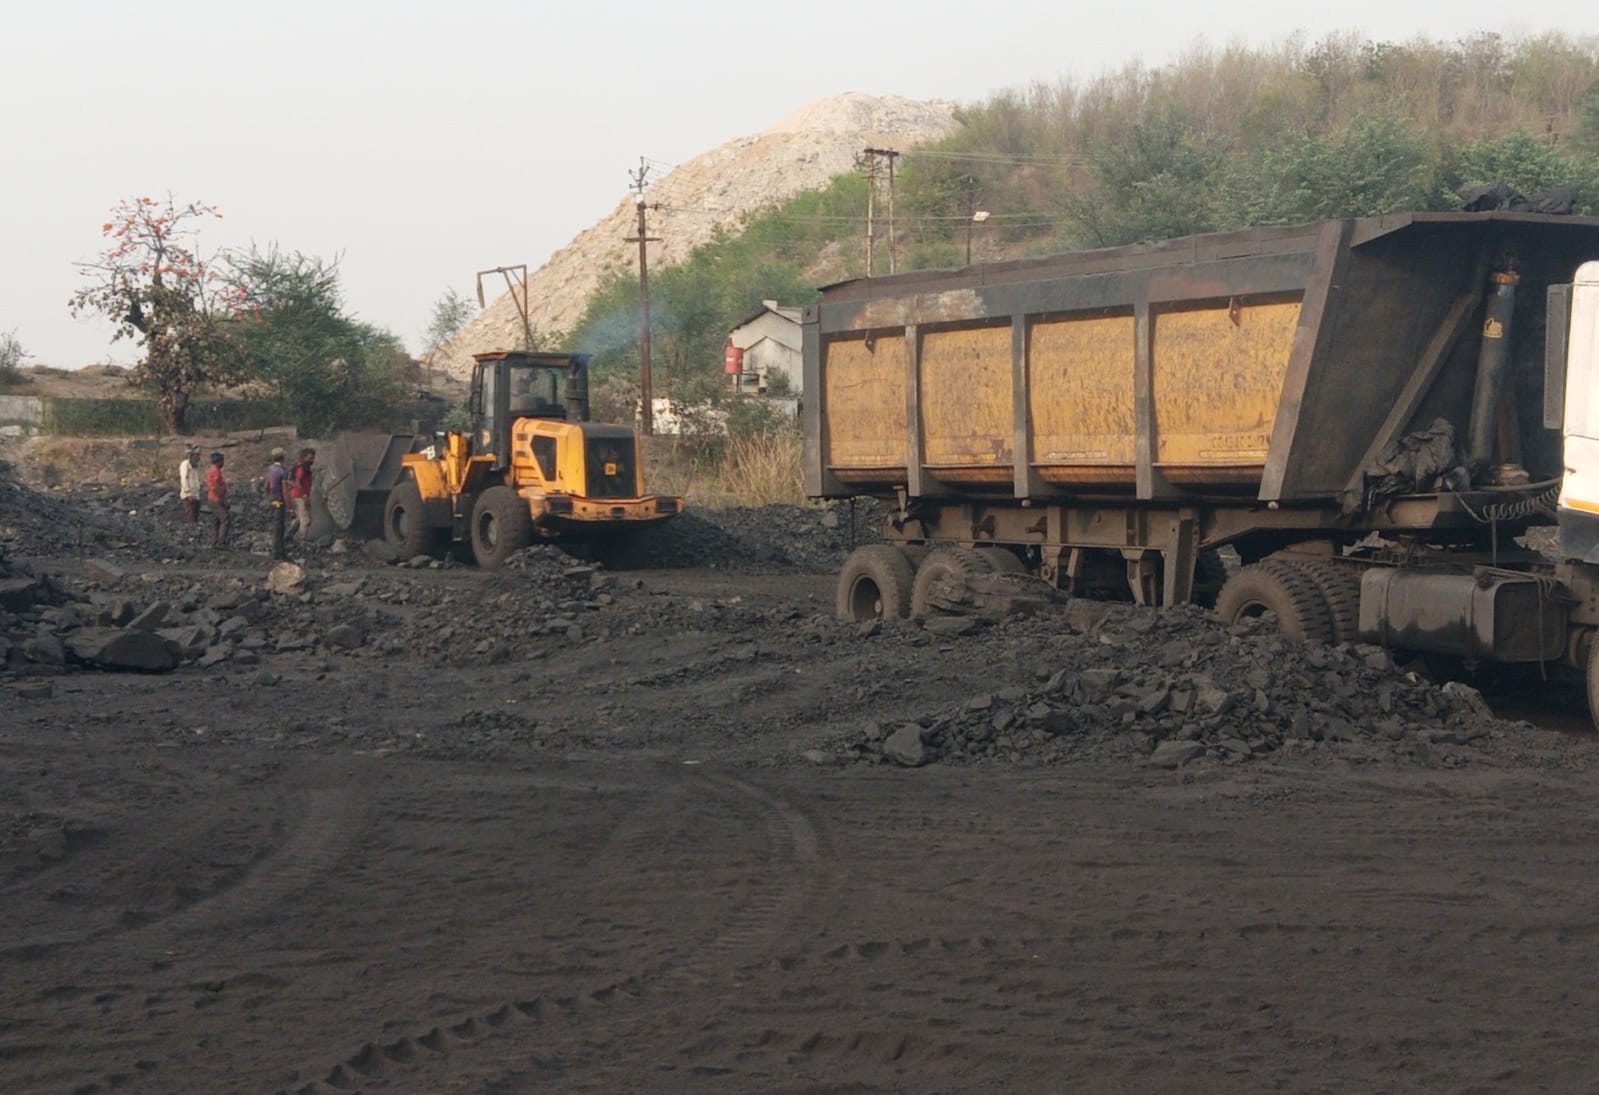 Transporters are being ignored, good coal is being supplied by tying up with friends